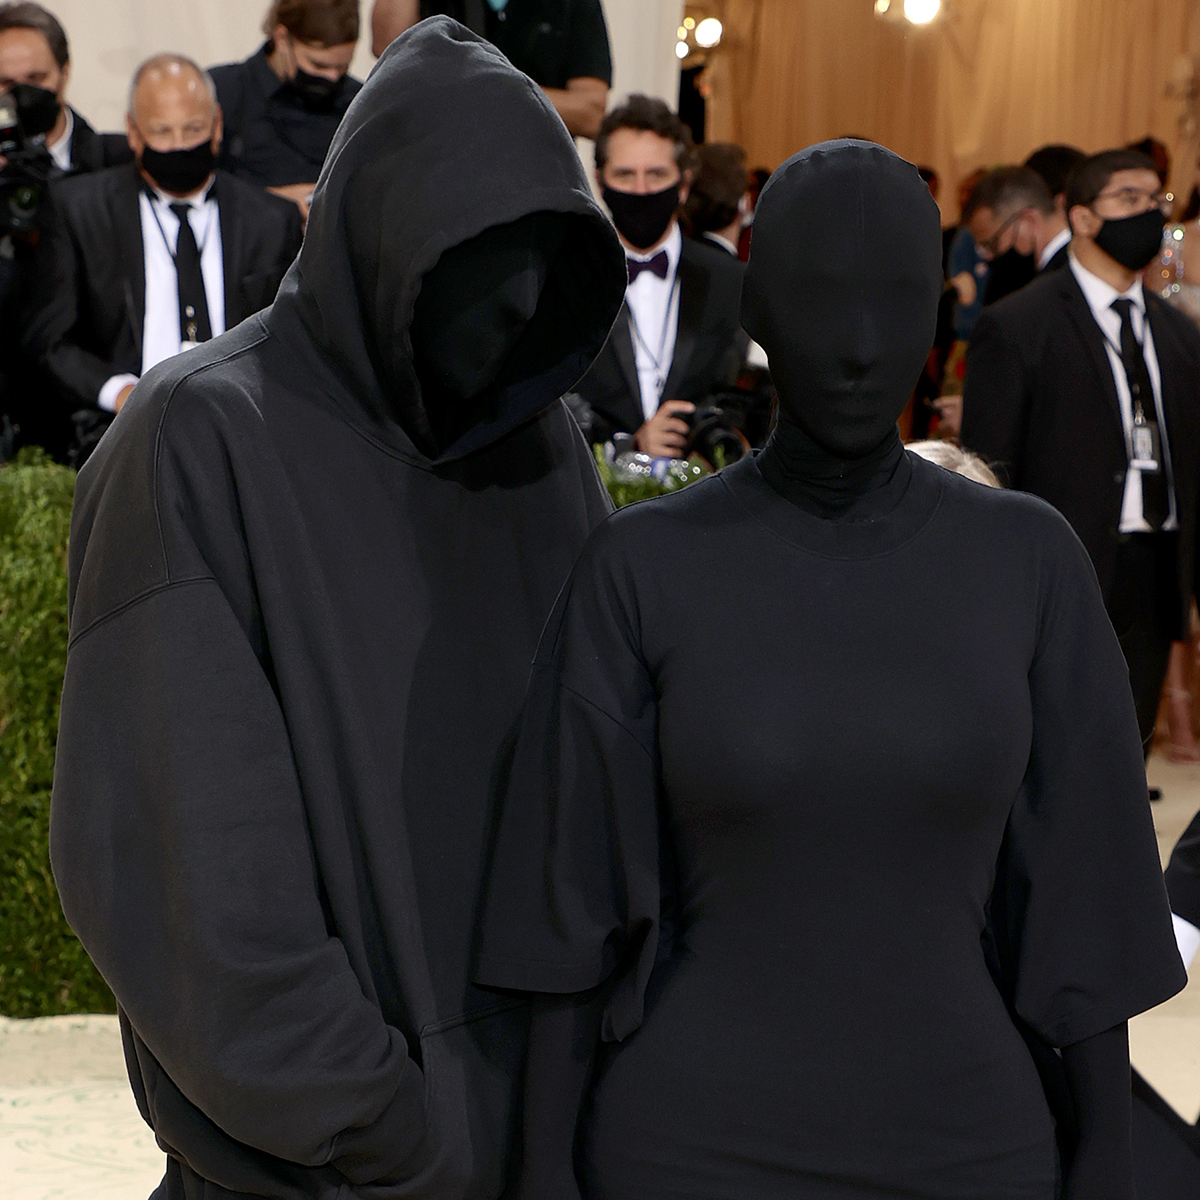 Kim Kardashian West's faceless Met Gala look was anything but incognito